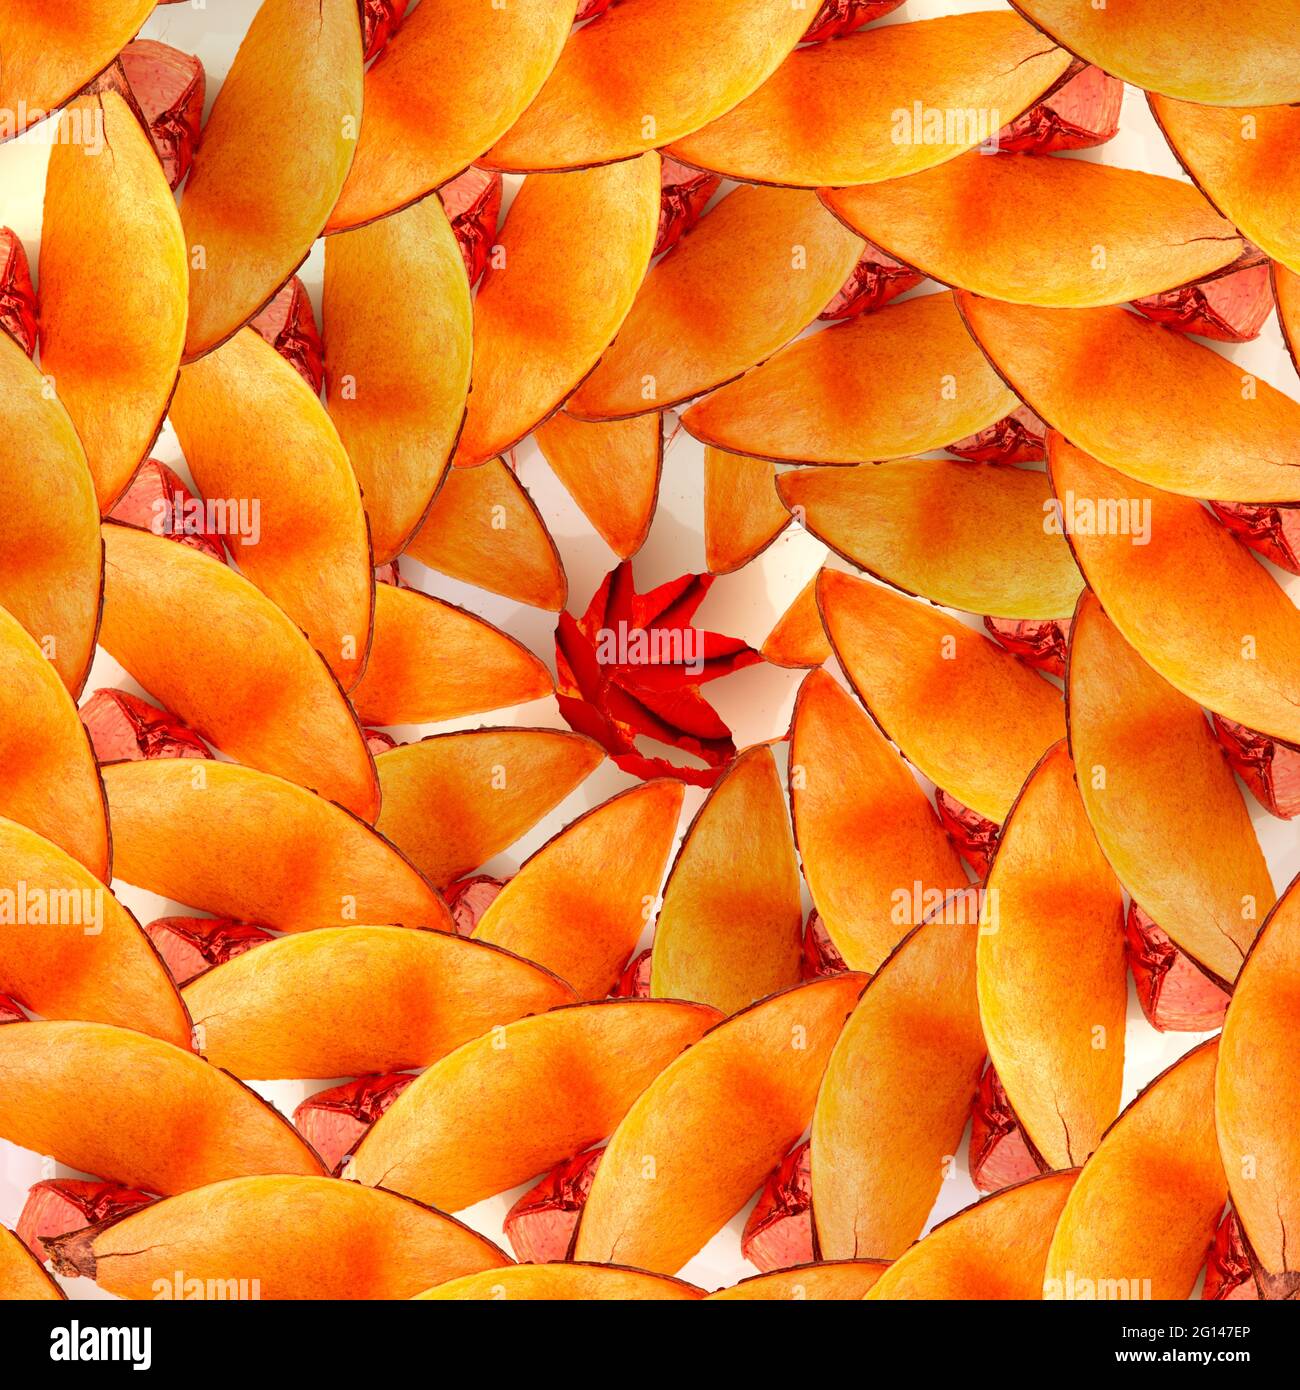 seamless spiral pattern made of dry semi-oval shell, orange creative background Stock Photo